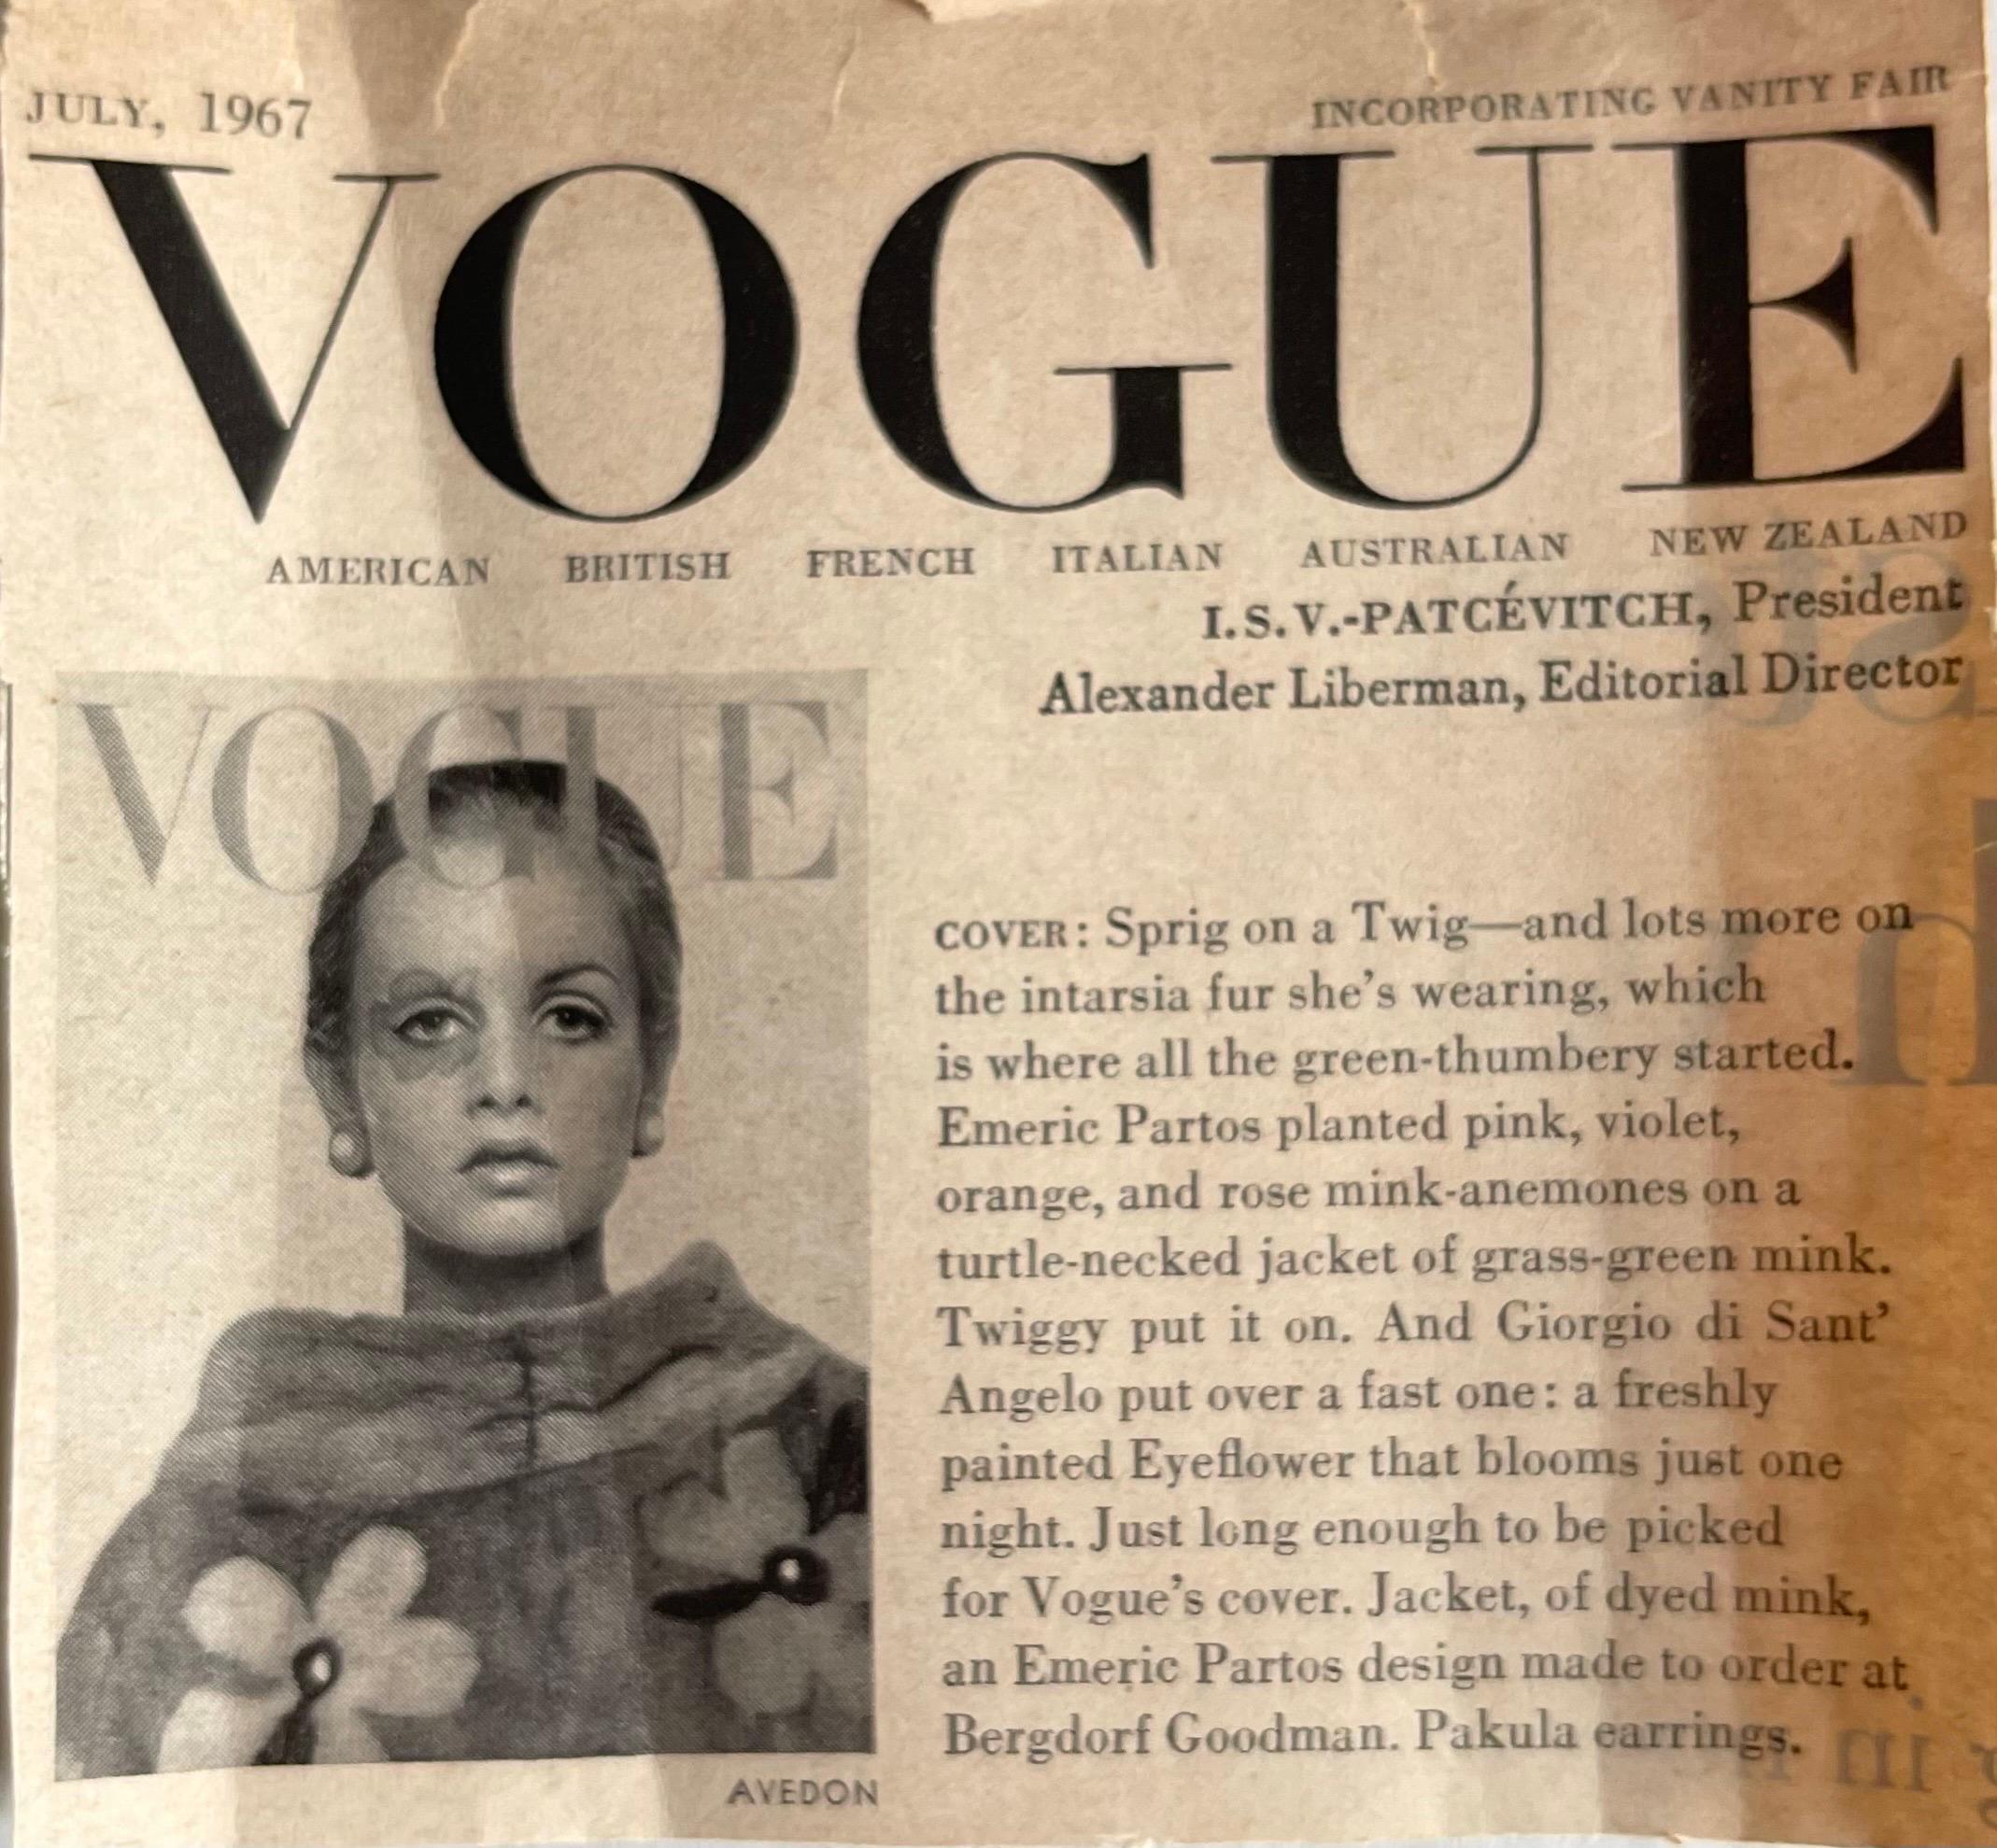 Vogue July 1967 Twiggy Cover Signed by Richard Avedon 2